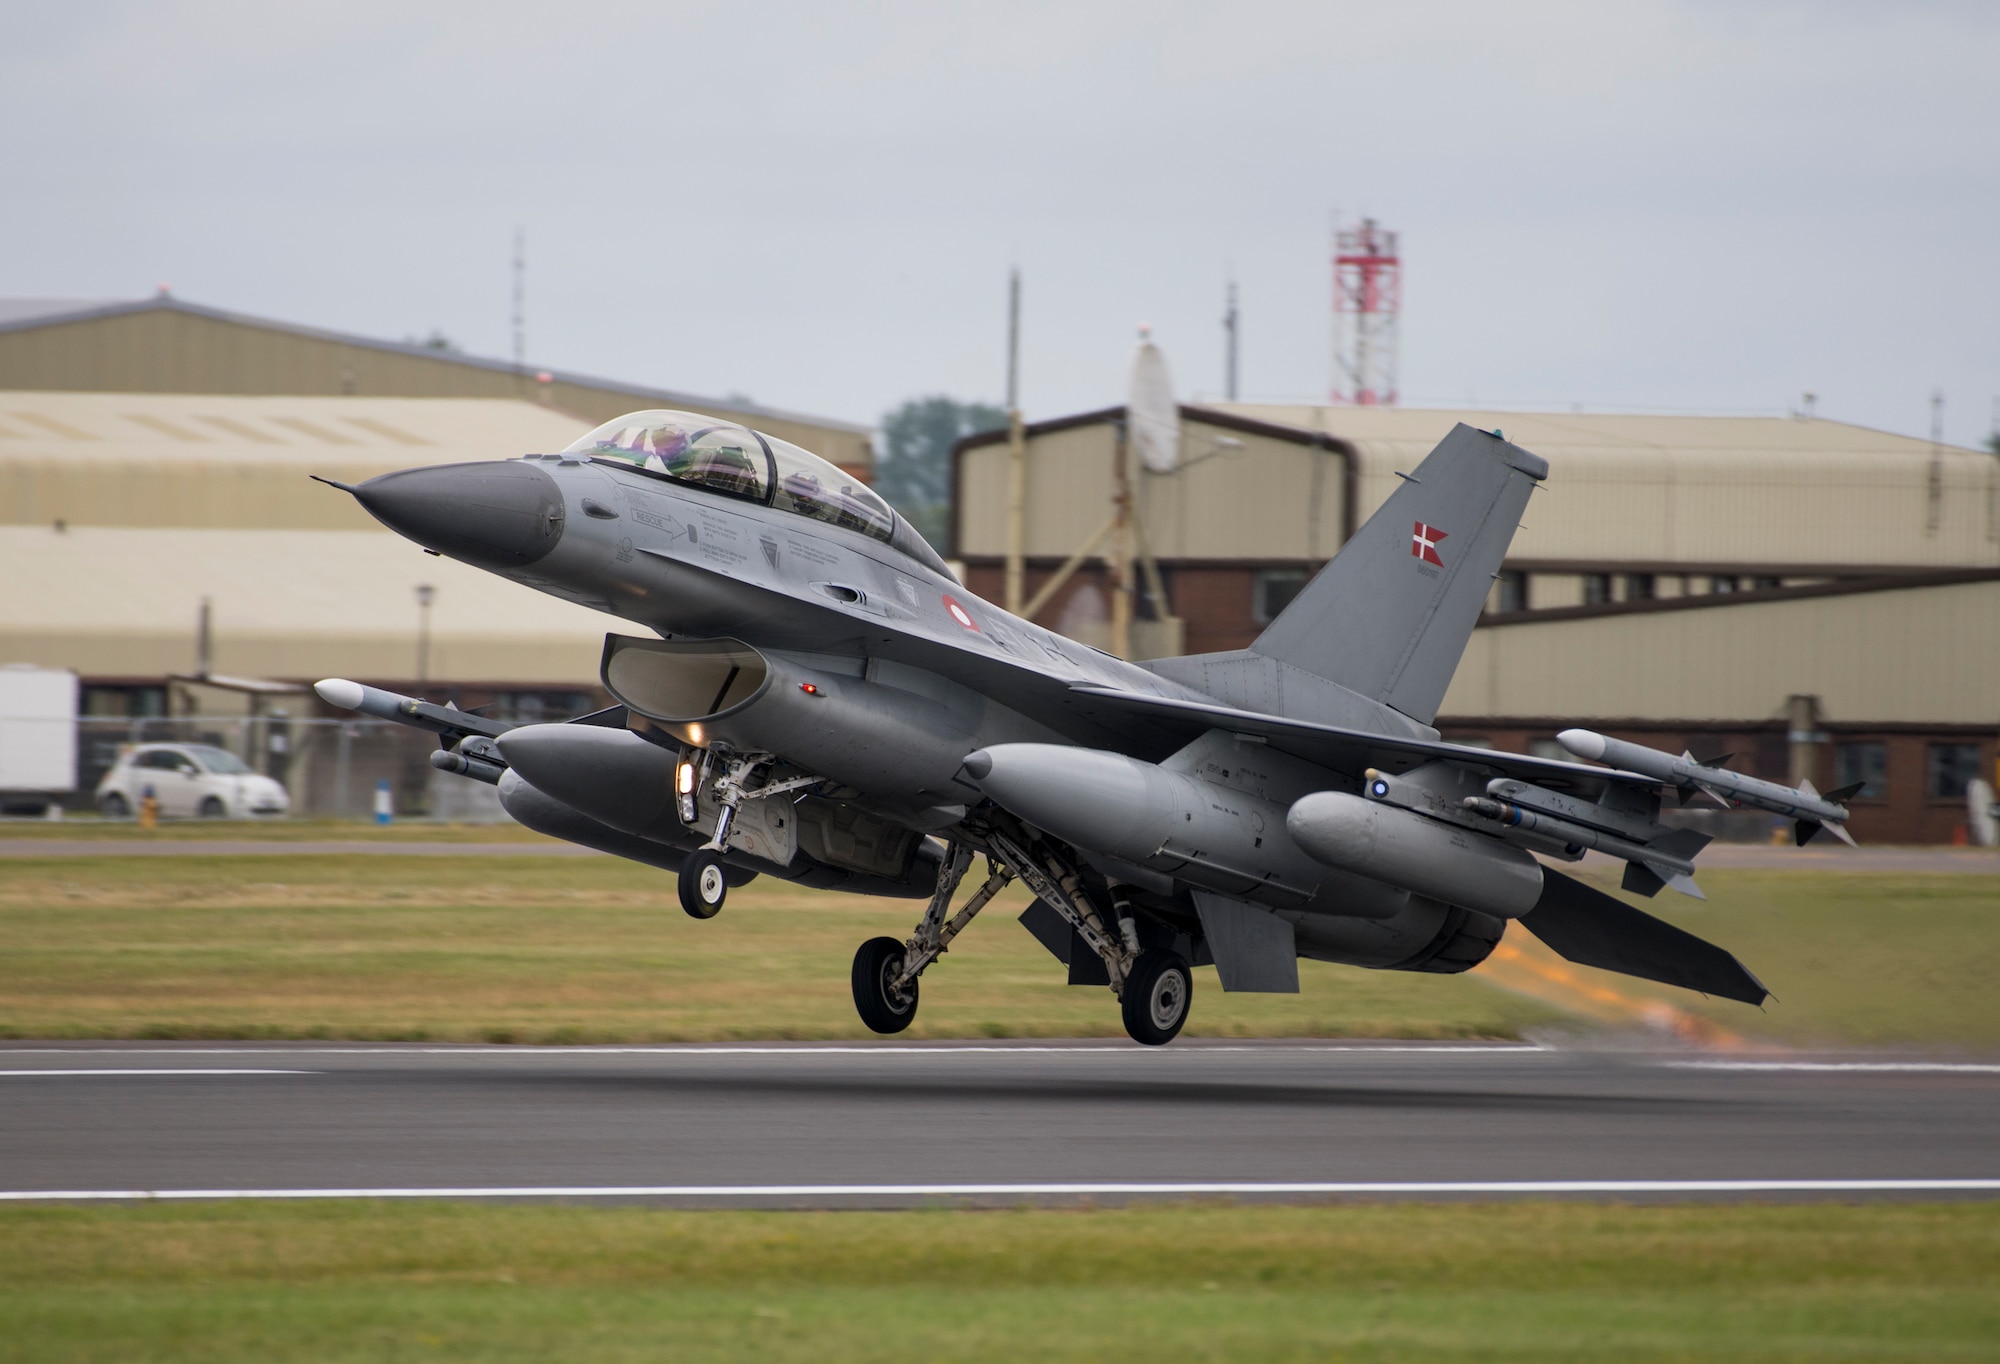 A Danish Air Force General Dynamics F-16AM/BM Fighting Falcon takes off from the runway at the 2019 Royal International Air Tattoo at RAF Fairford, England, July 20, 2019. This year, RIAT commemorated the 70th anniversary of NATO and highlighted the United States' enduring commitment to its European allies. (U.S. Air Force photo by Airman 1st Class Jennifer Zima)